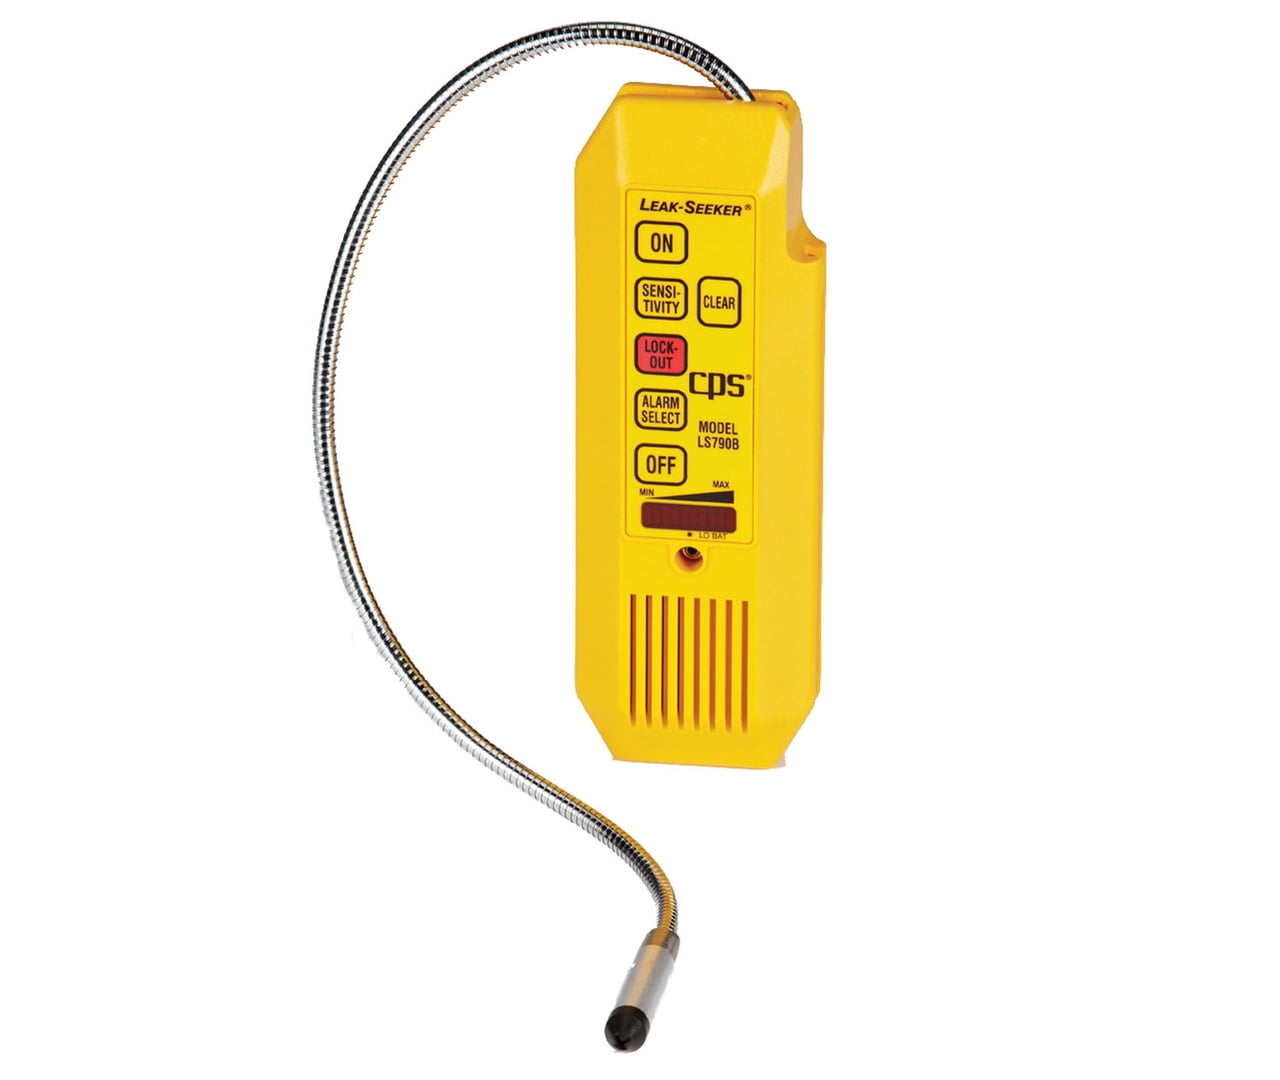 DR82 - LCD Display Pinpoint Infrared Refrigerant Leak Detector